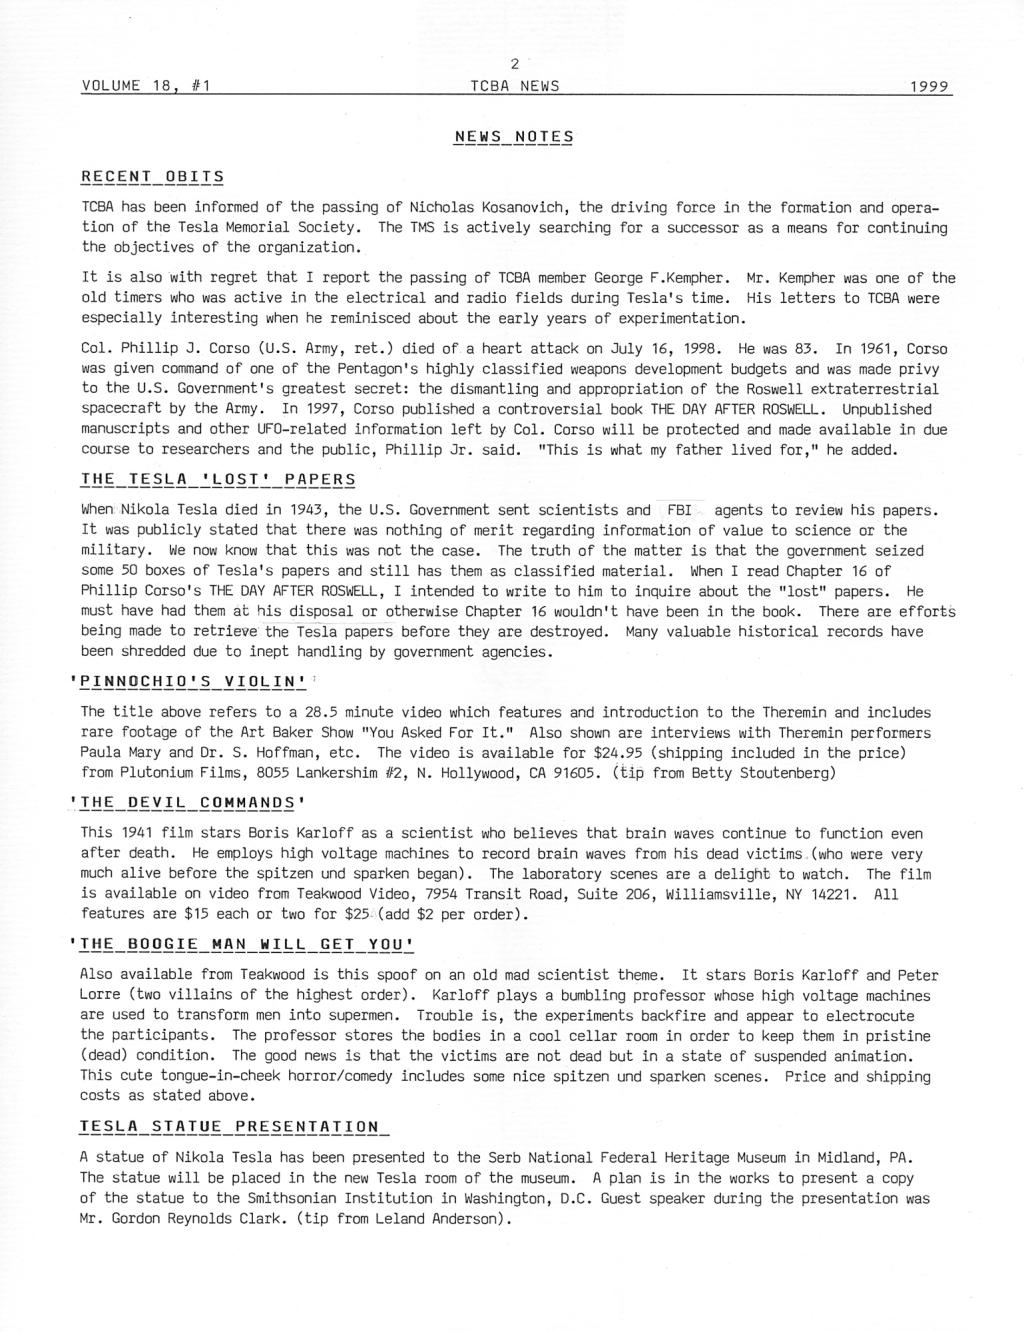 TCBA Volume 18 - Issue 1 - Page 2 of 18